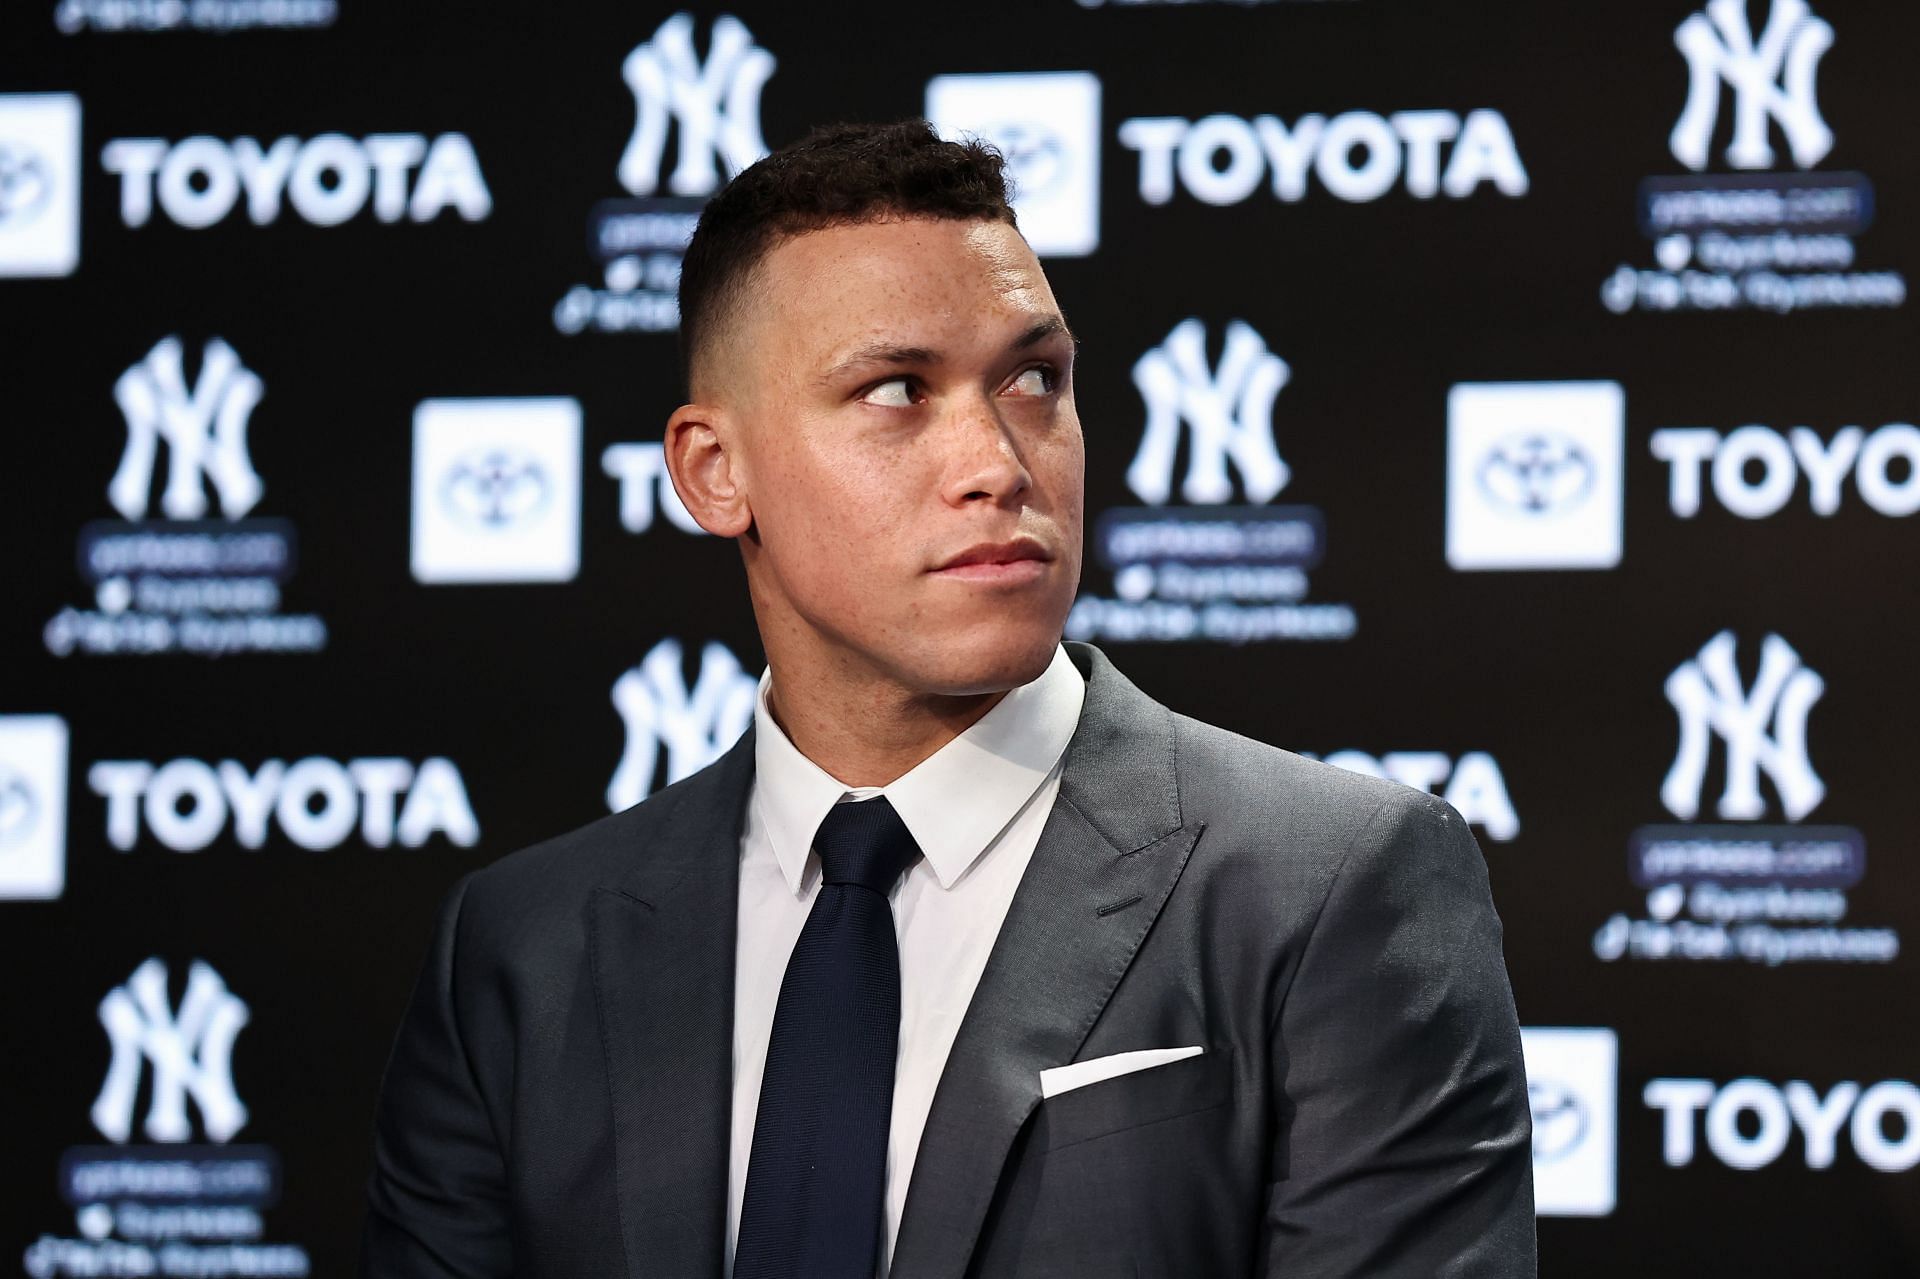 Aaron of the New York Yankees looks on during a press conference at Yankee Stadium.